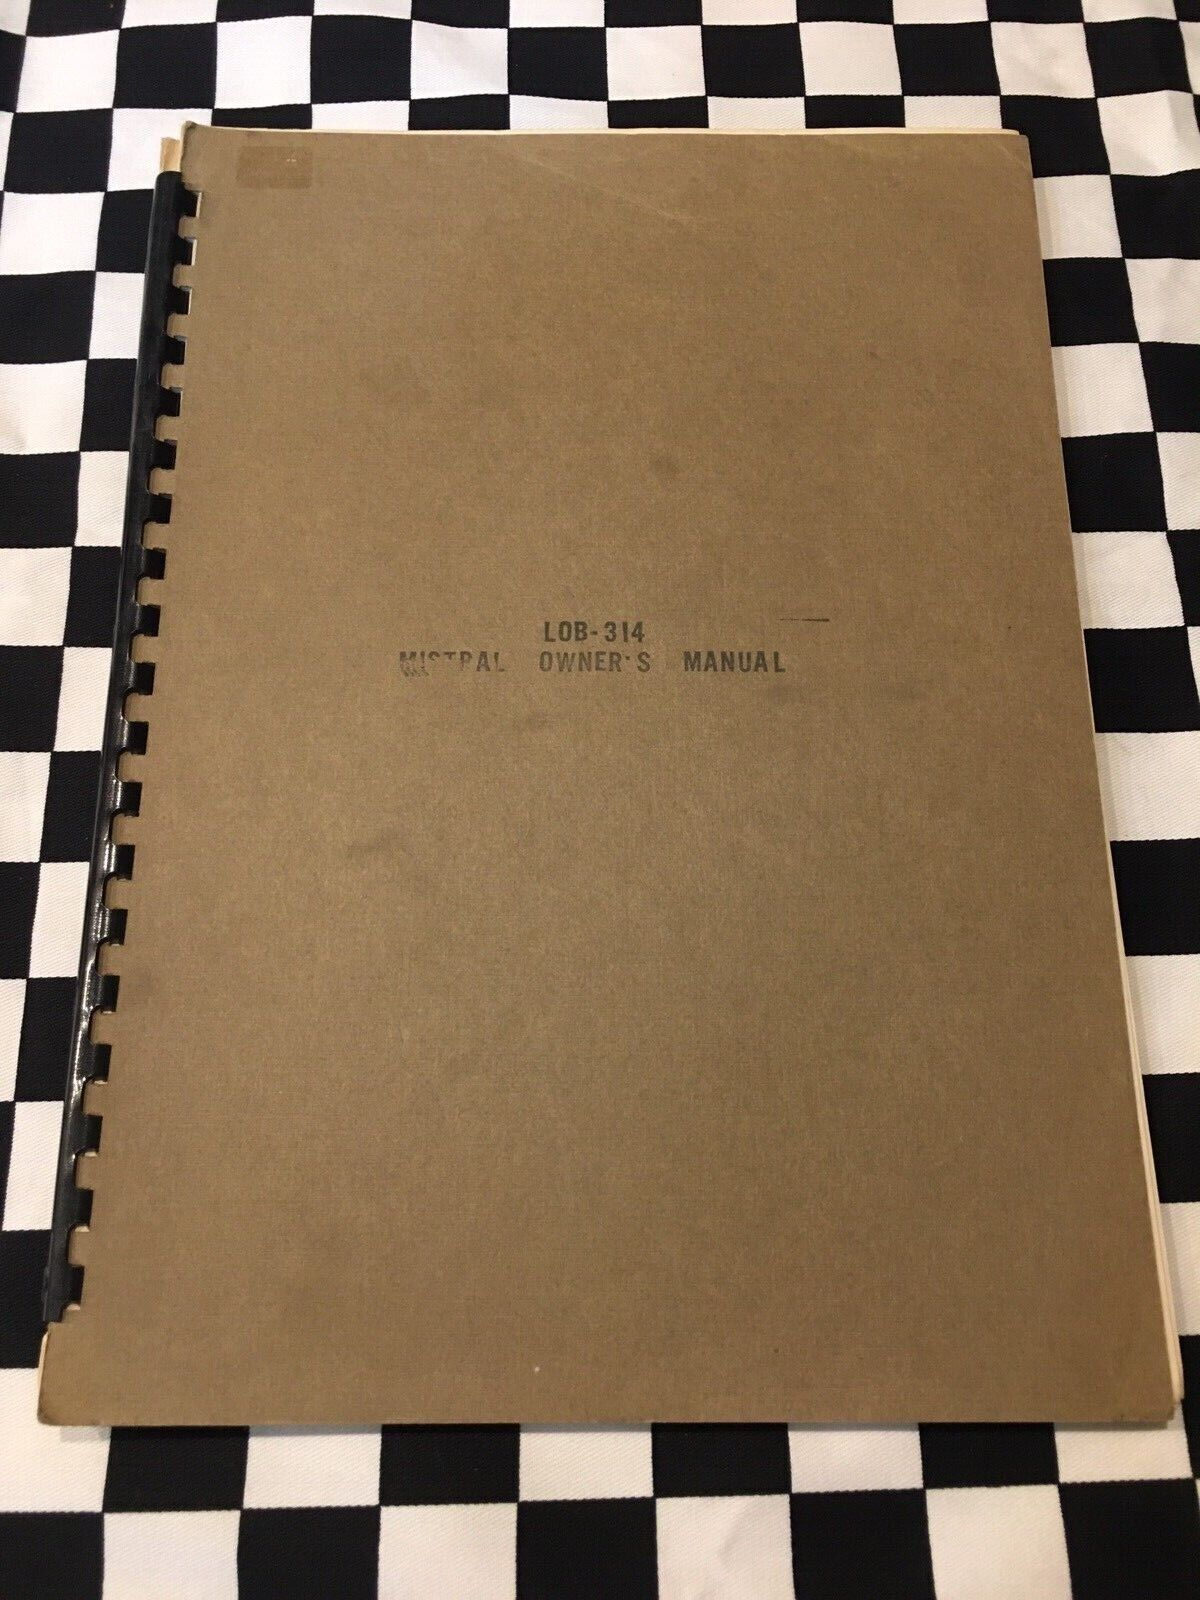 Vintage Maserati MISTRAL Owners Service Manual With Illustrations LOB-314 AM109